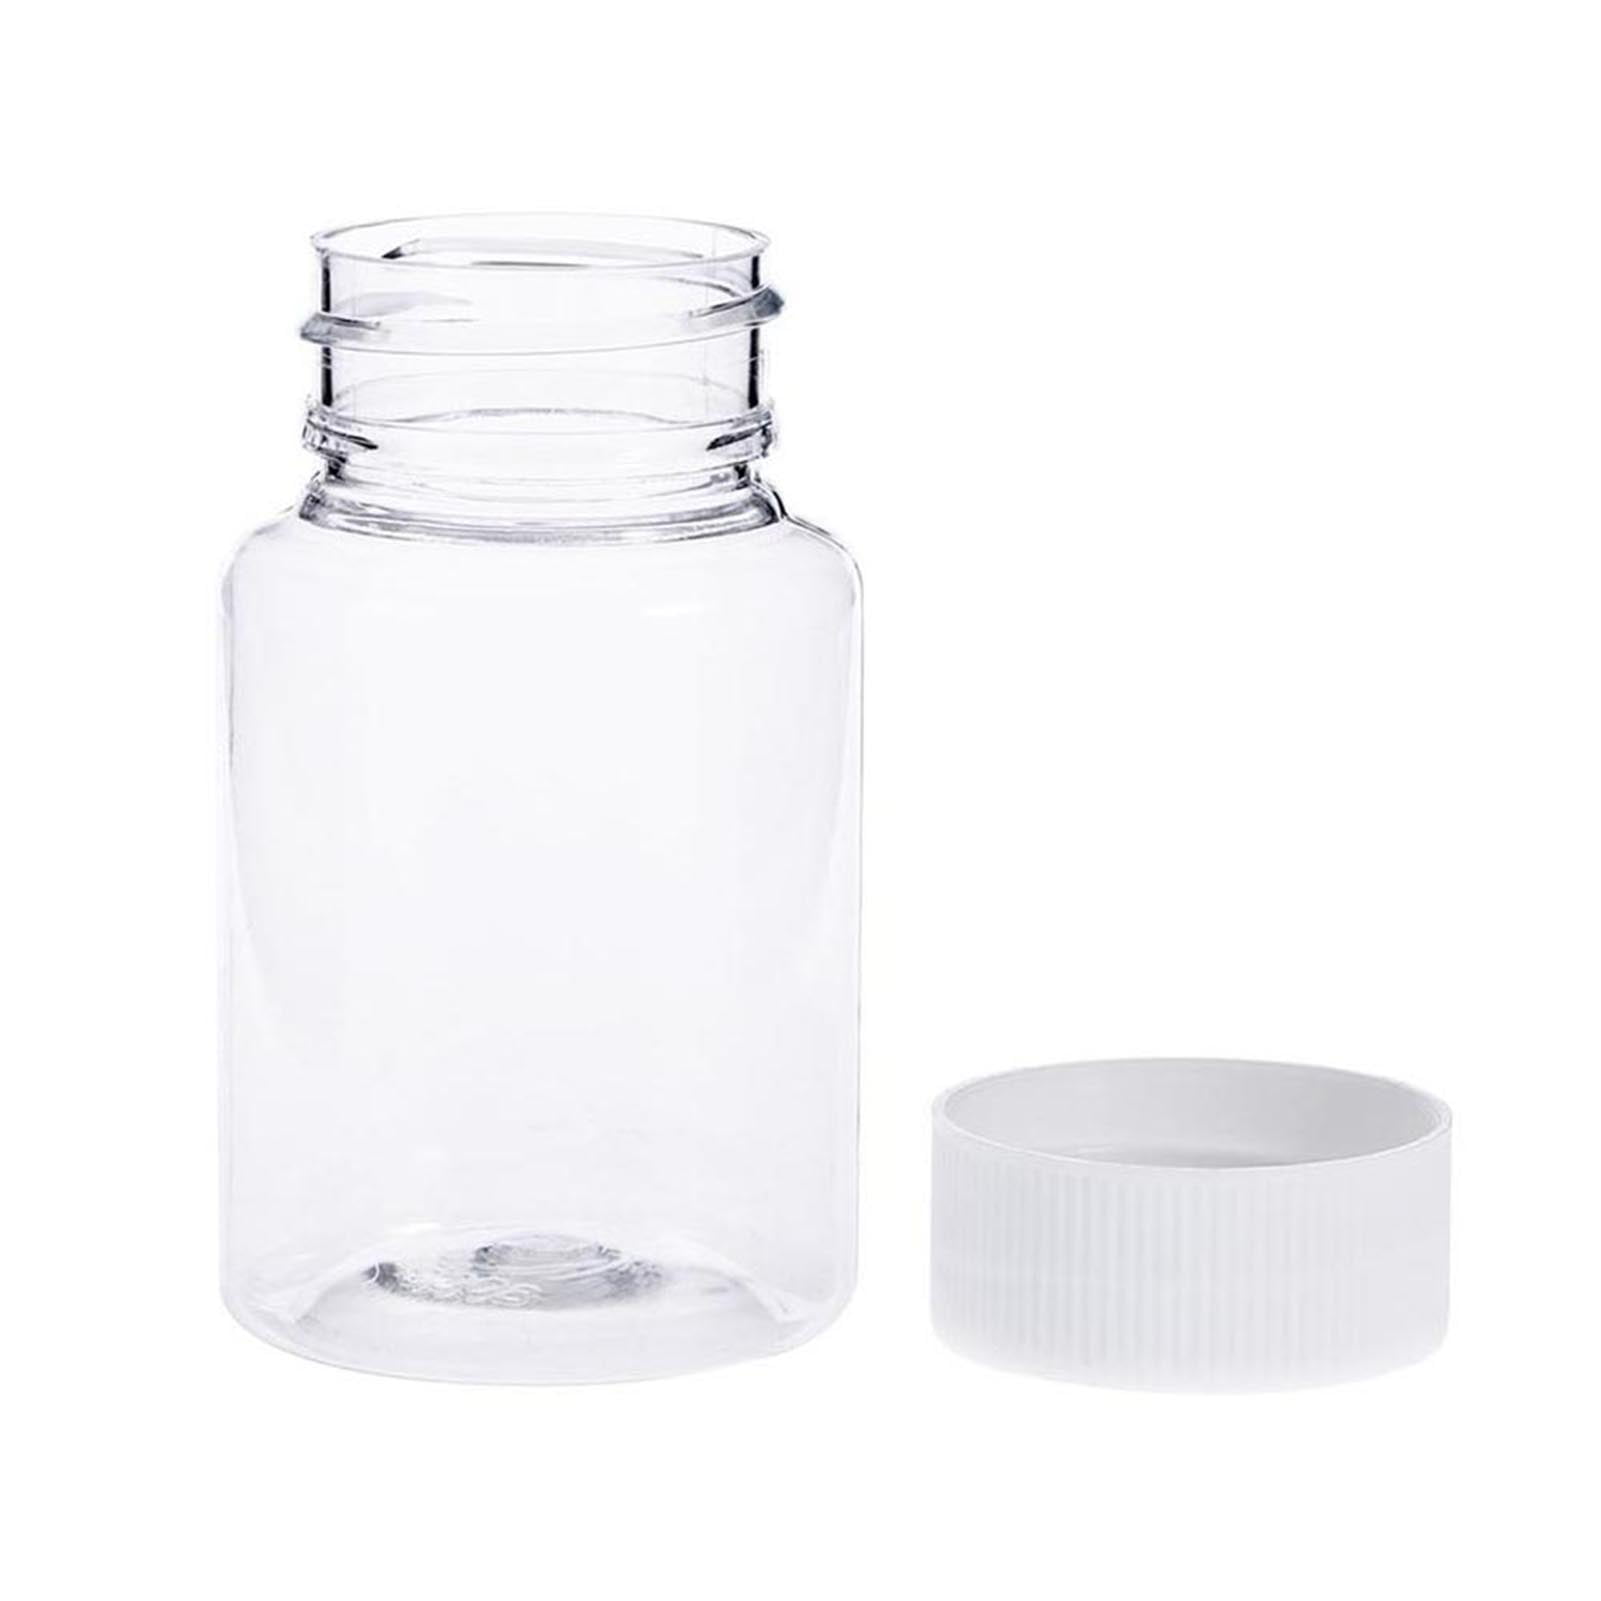 ULTECHNOVO Clear Pill Bottle, 10pcs Pill Bottle Container, Medicine  Containers with Caps 30ml Plastic Empty Bottles Portable Lab Reagent Bottle  for